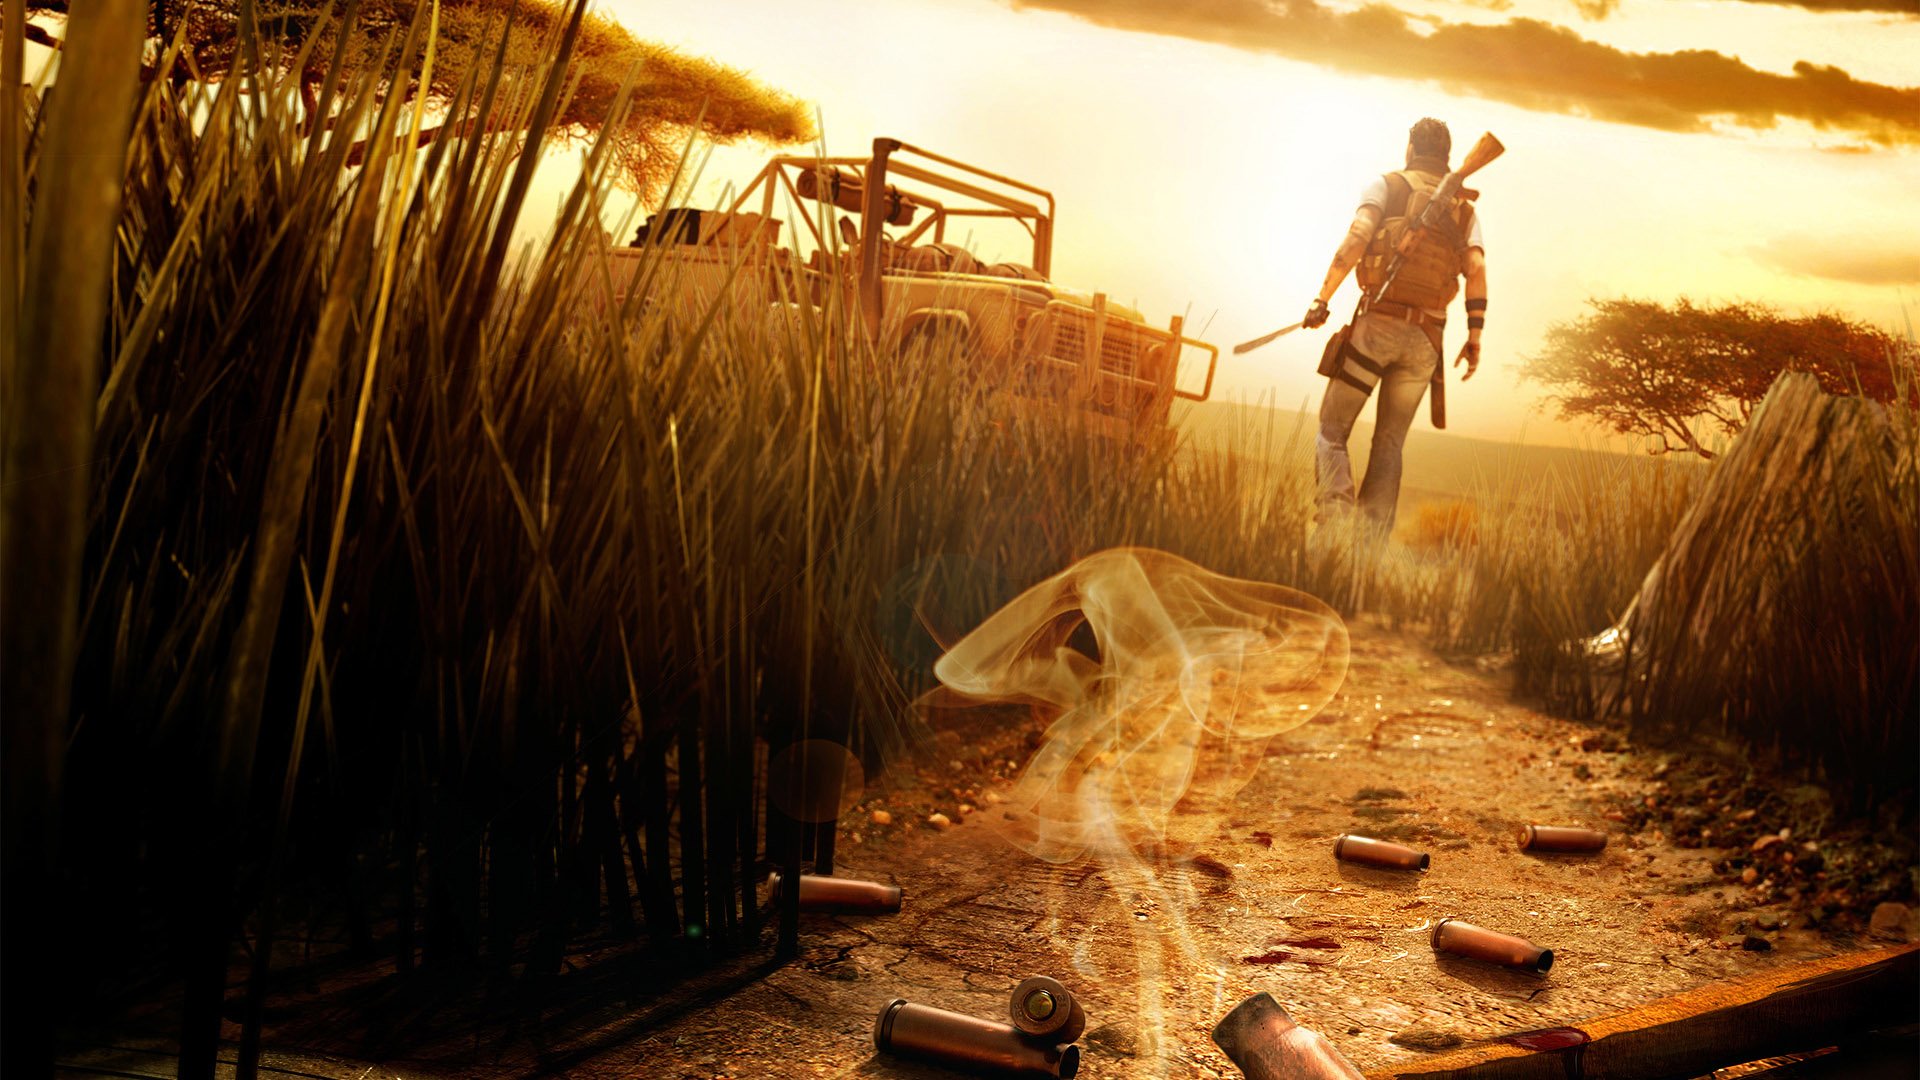 Far Cry 2 Wallpapers